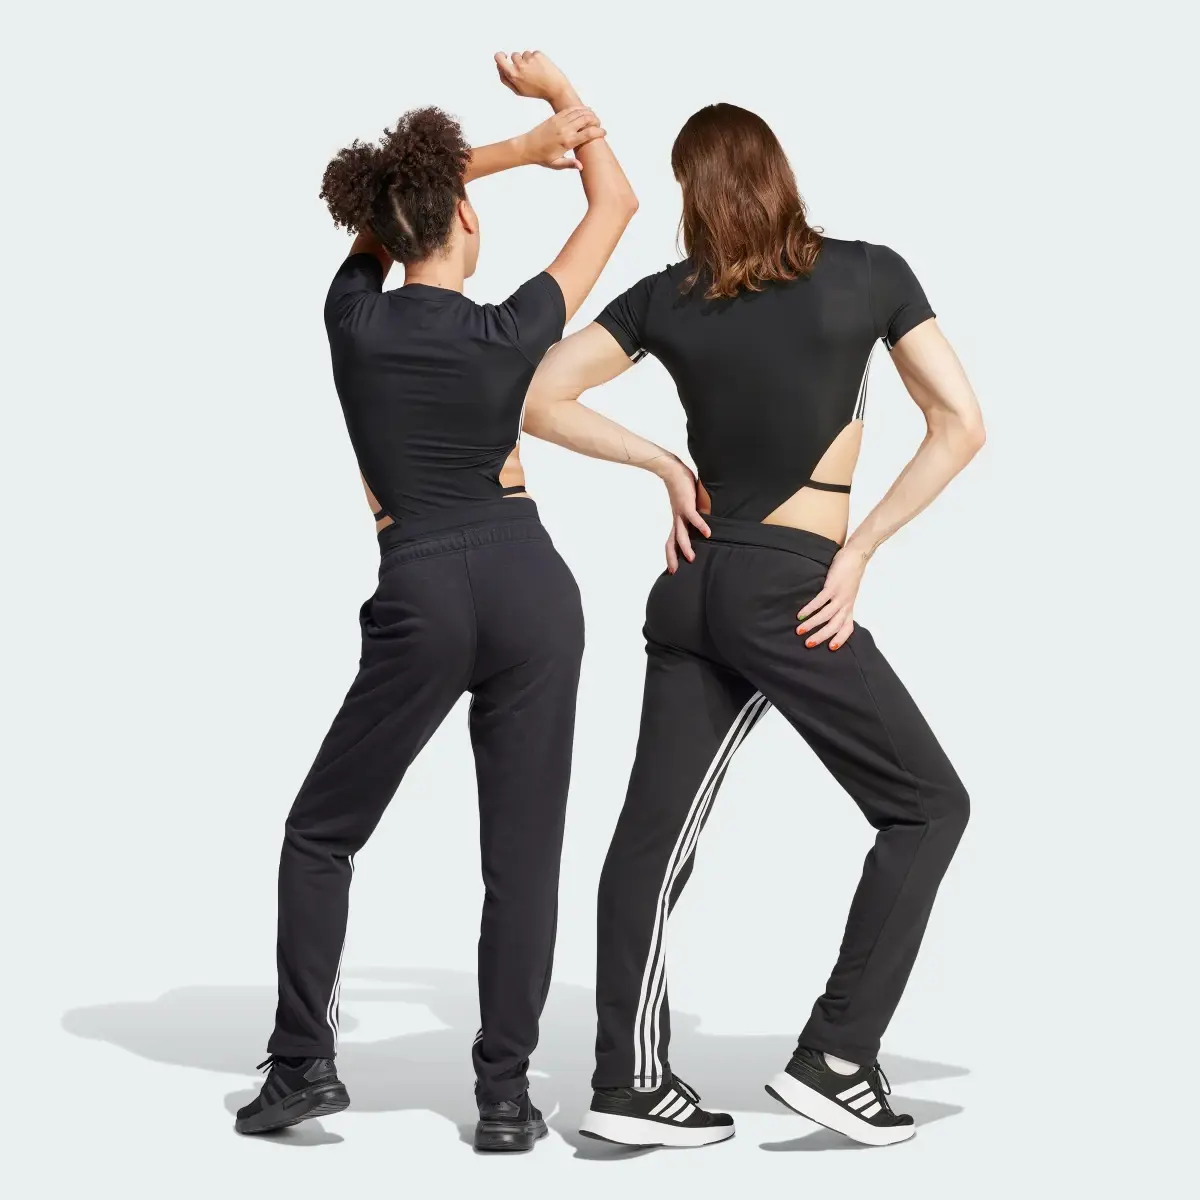 Adidas Express All-Gender Anti-Microbial Joggers. 2